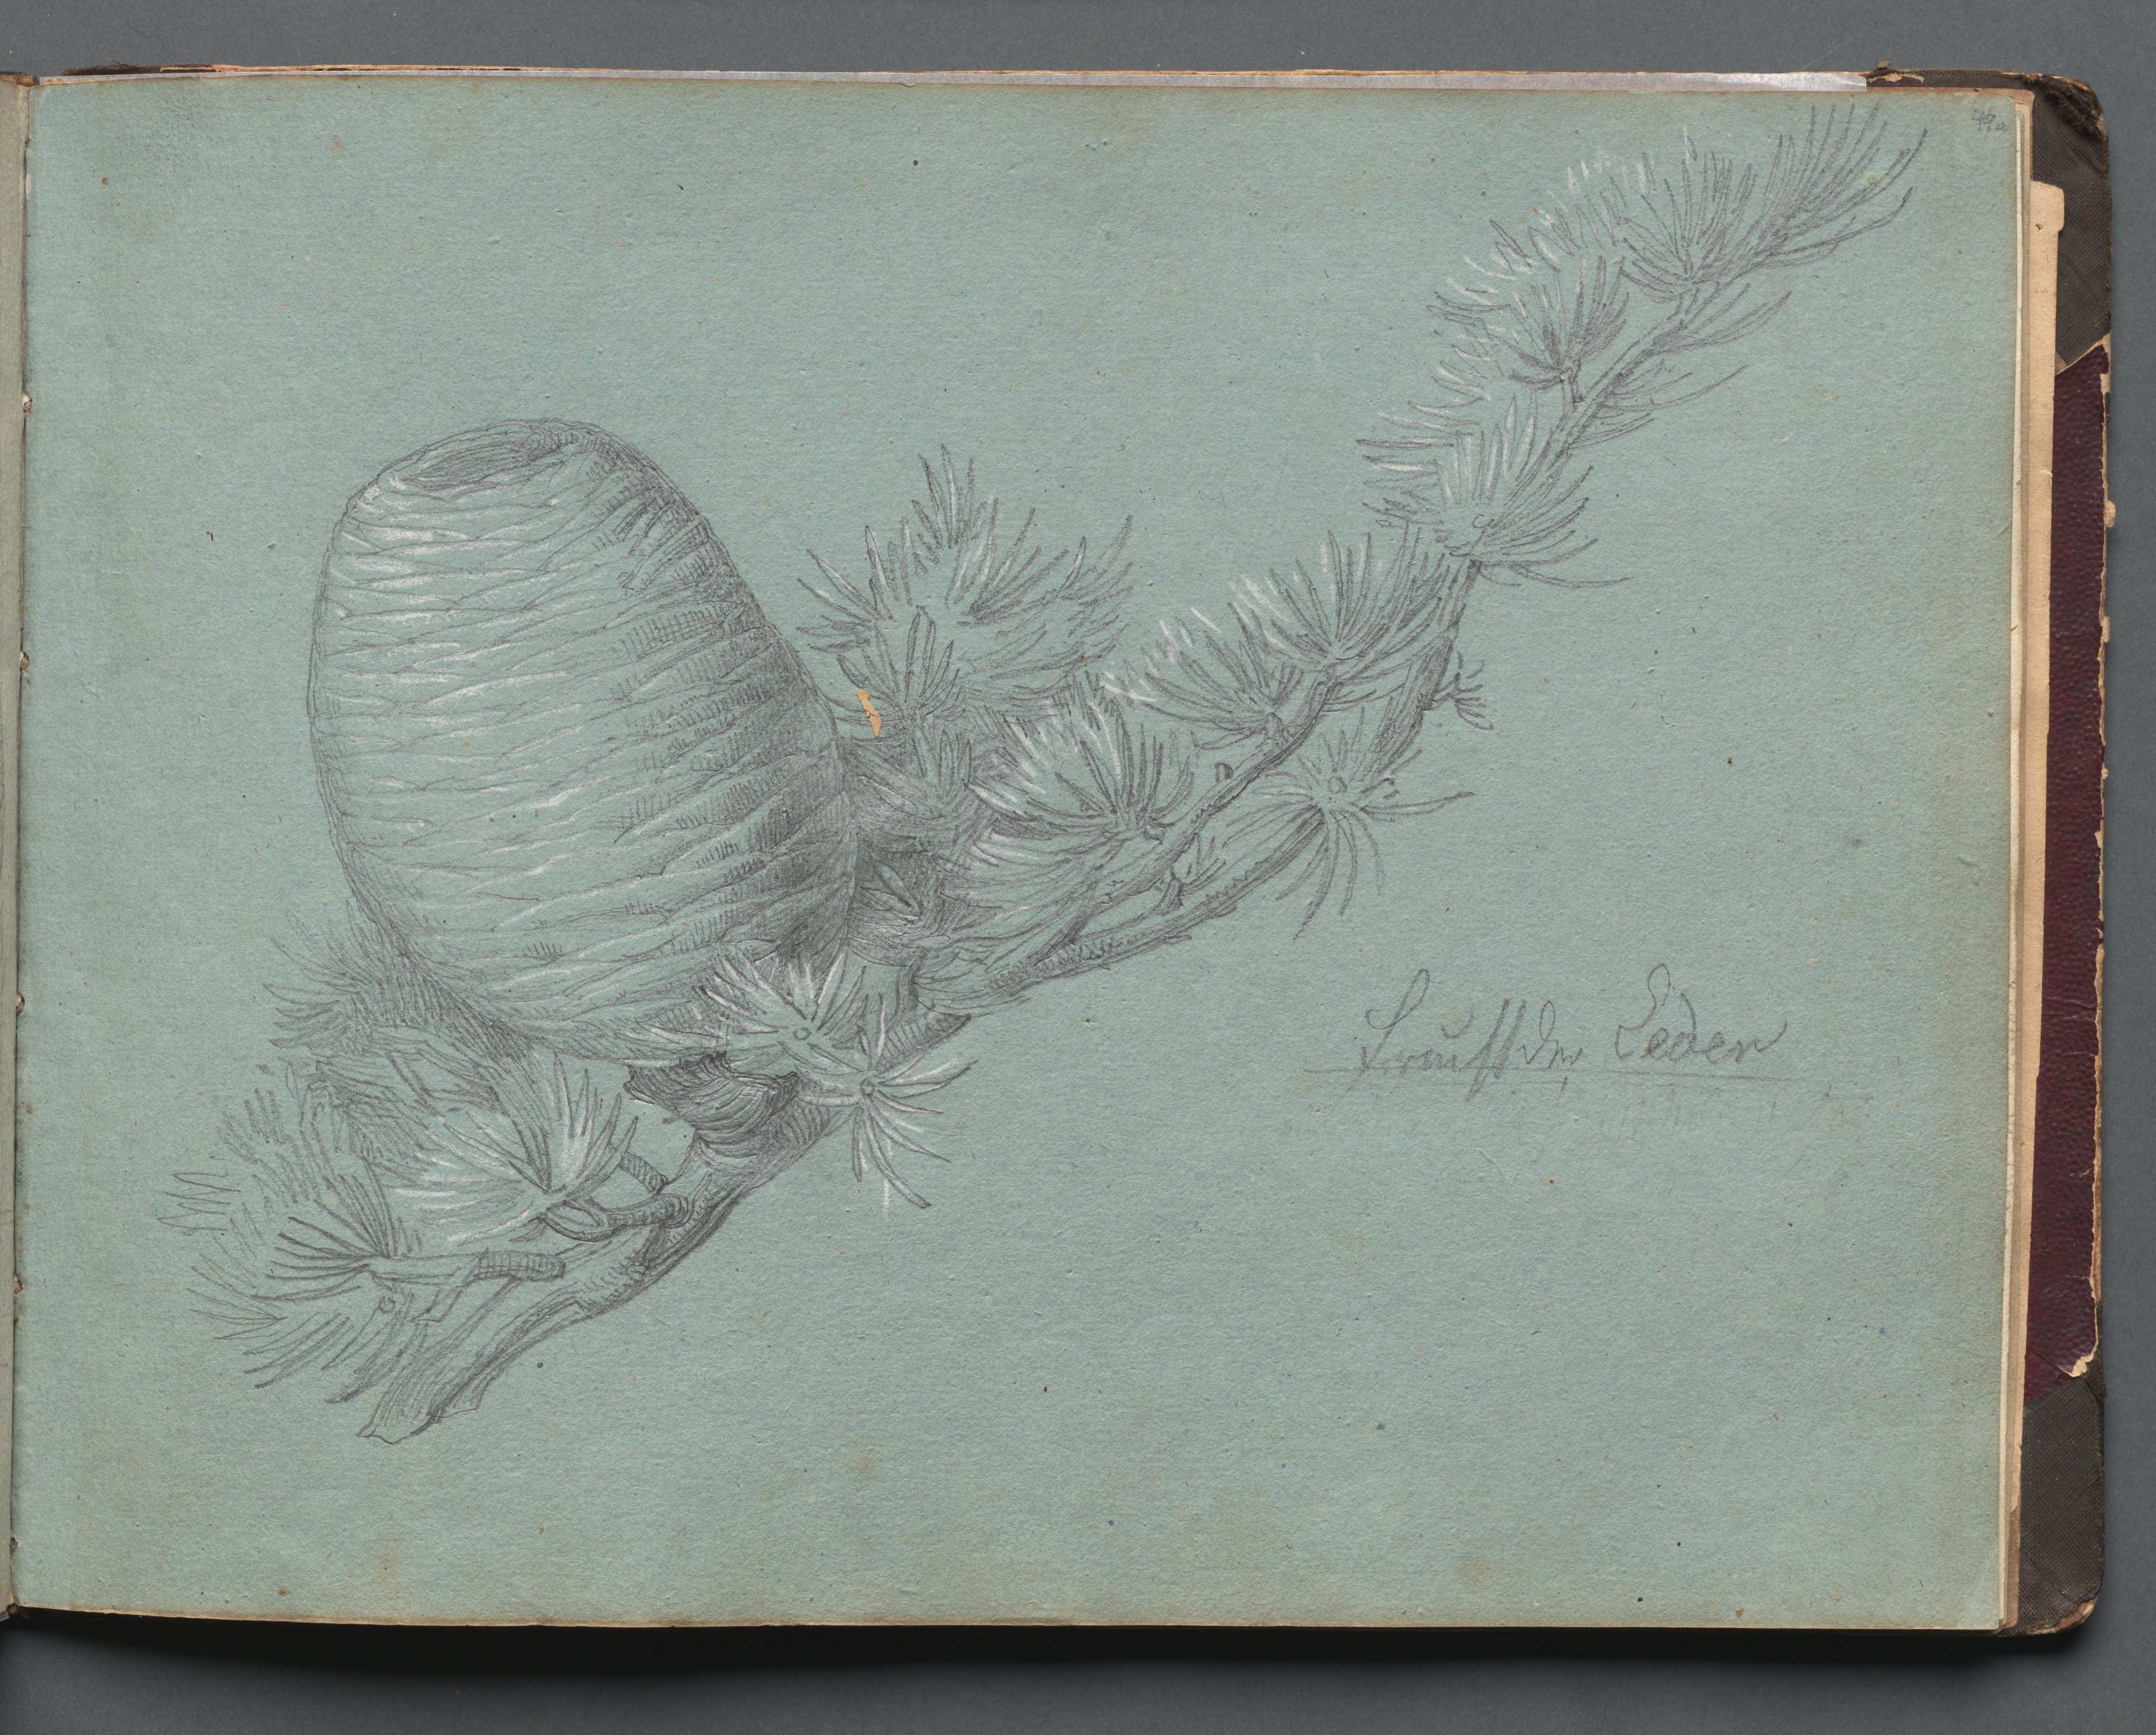 Album with Views of Rome and Surroundings, Landscape Studies, page 49a: Study of a Evergreen Branch with Pinecone